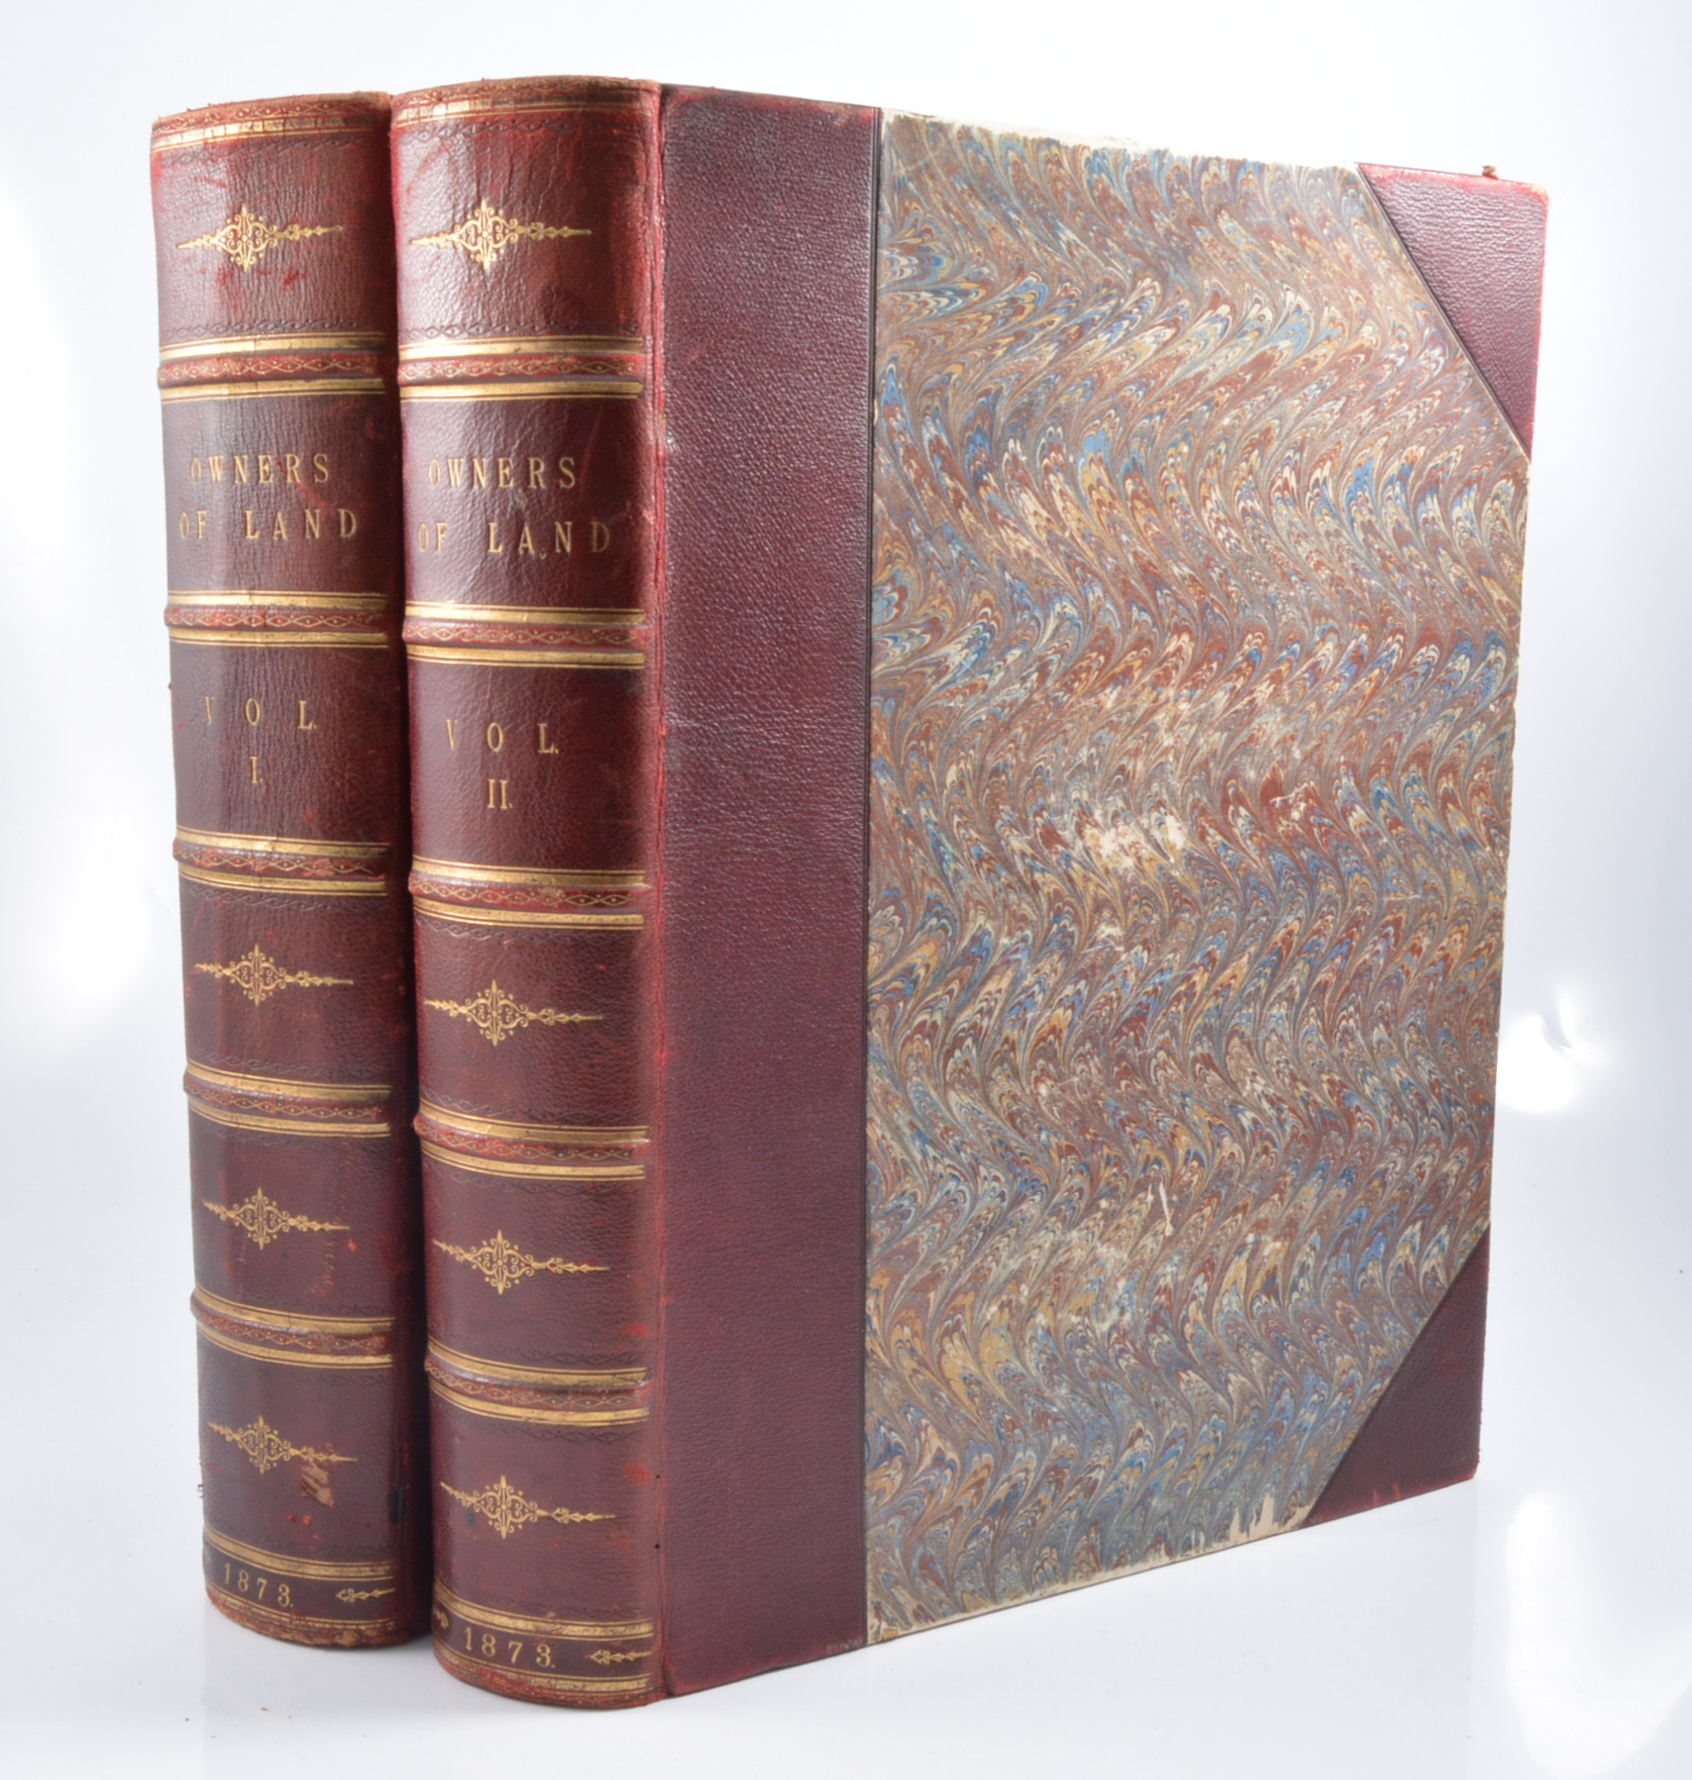 Return of Owners of Land, 1878, in two vols, London 1875, half Morocco, folio.